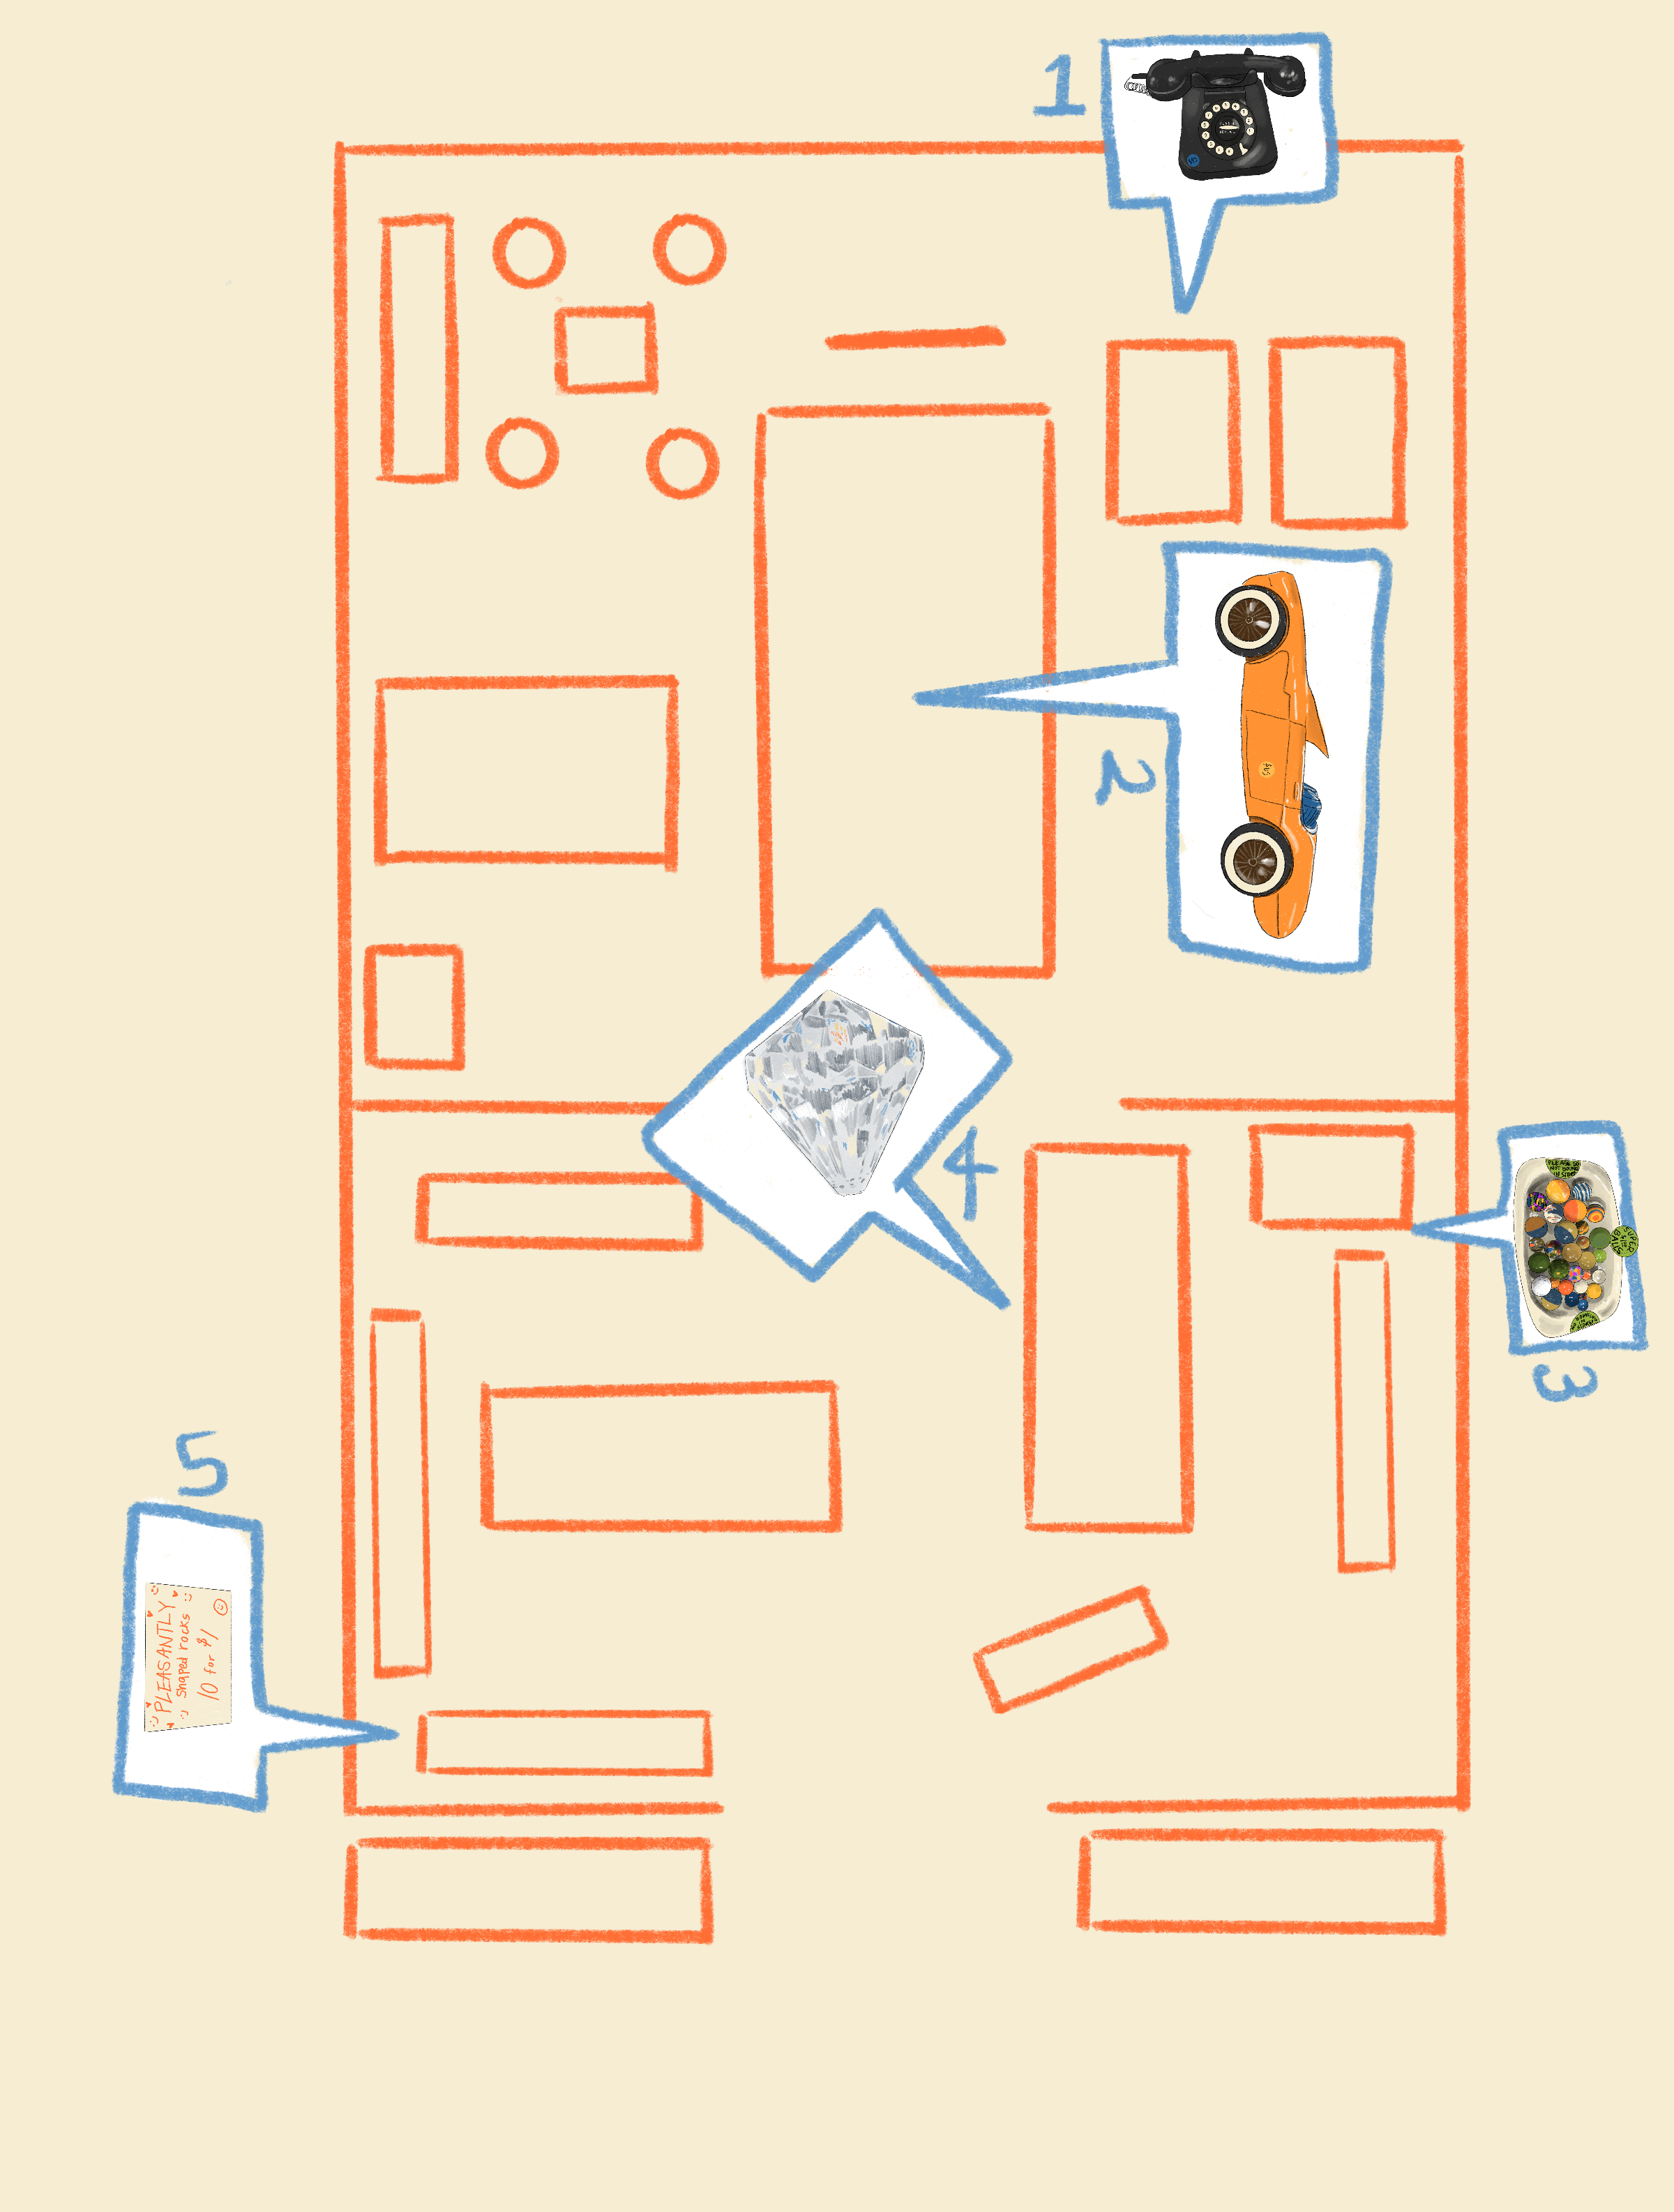 A rough map of the layout of No Particular Hours. The lines are red on a cream background. There are bubbles with numbers next to them that indicate the approximate location of various objects.